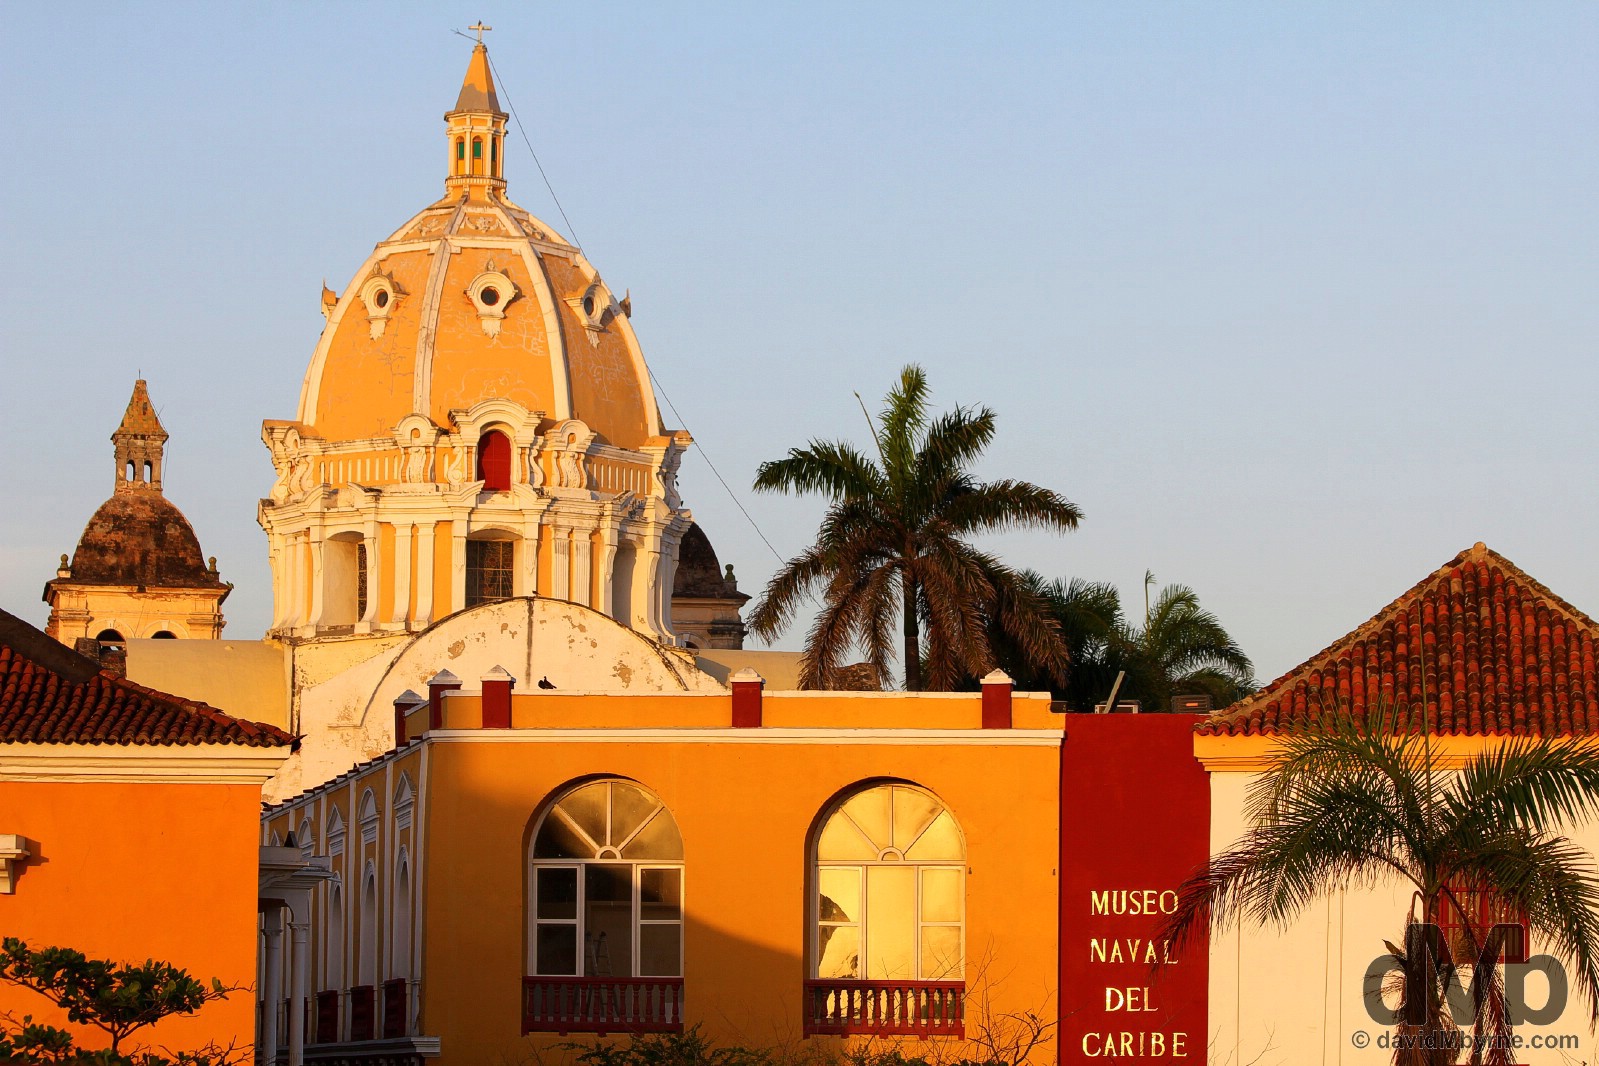 Sunset light on buildings of Old Town as seen from Las Murallas, the Old Town walls of Cartagena, Colombia. June 24, 2015.